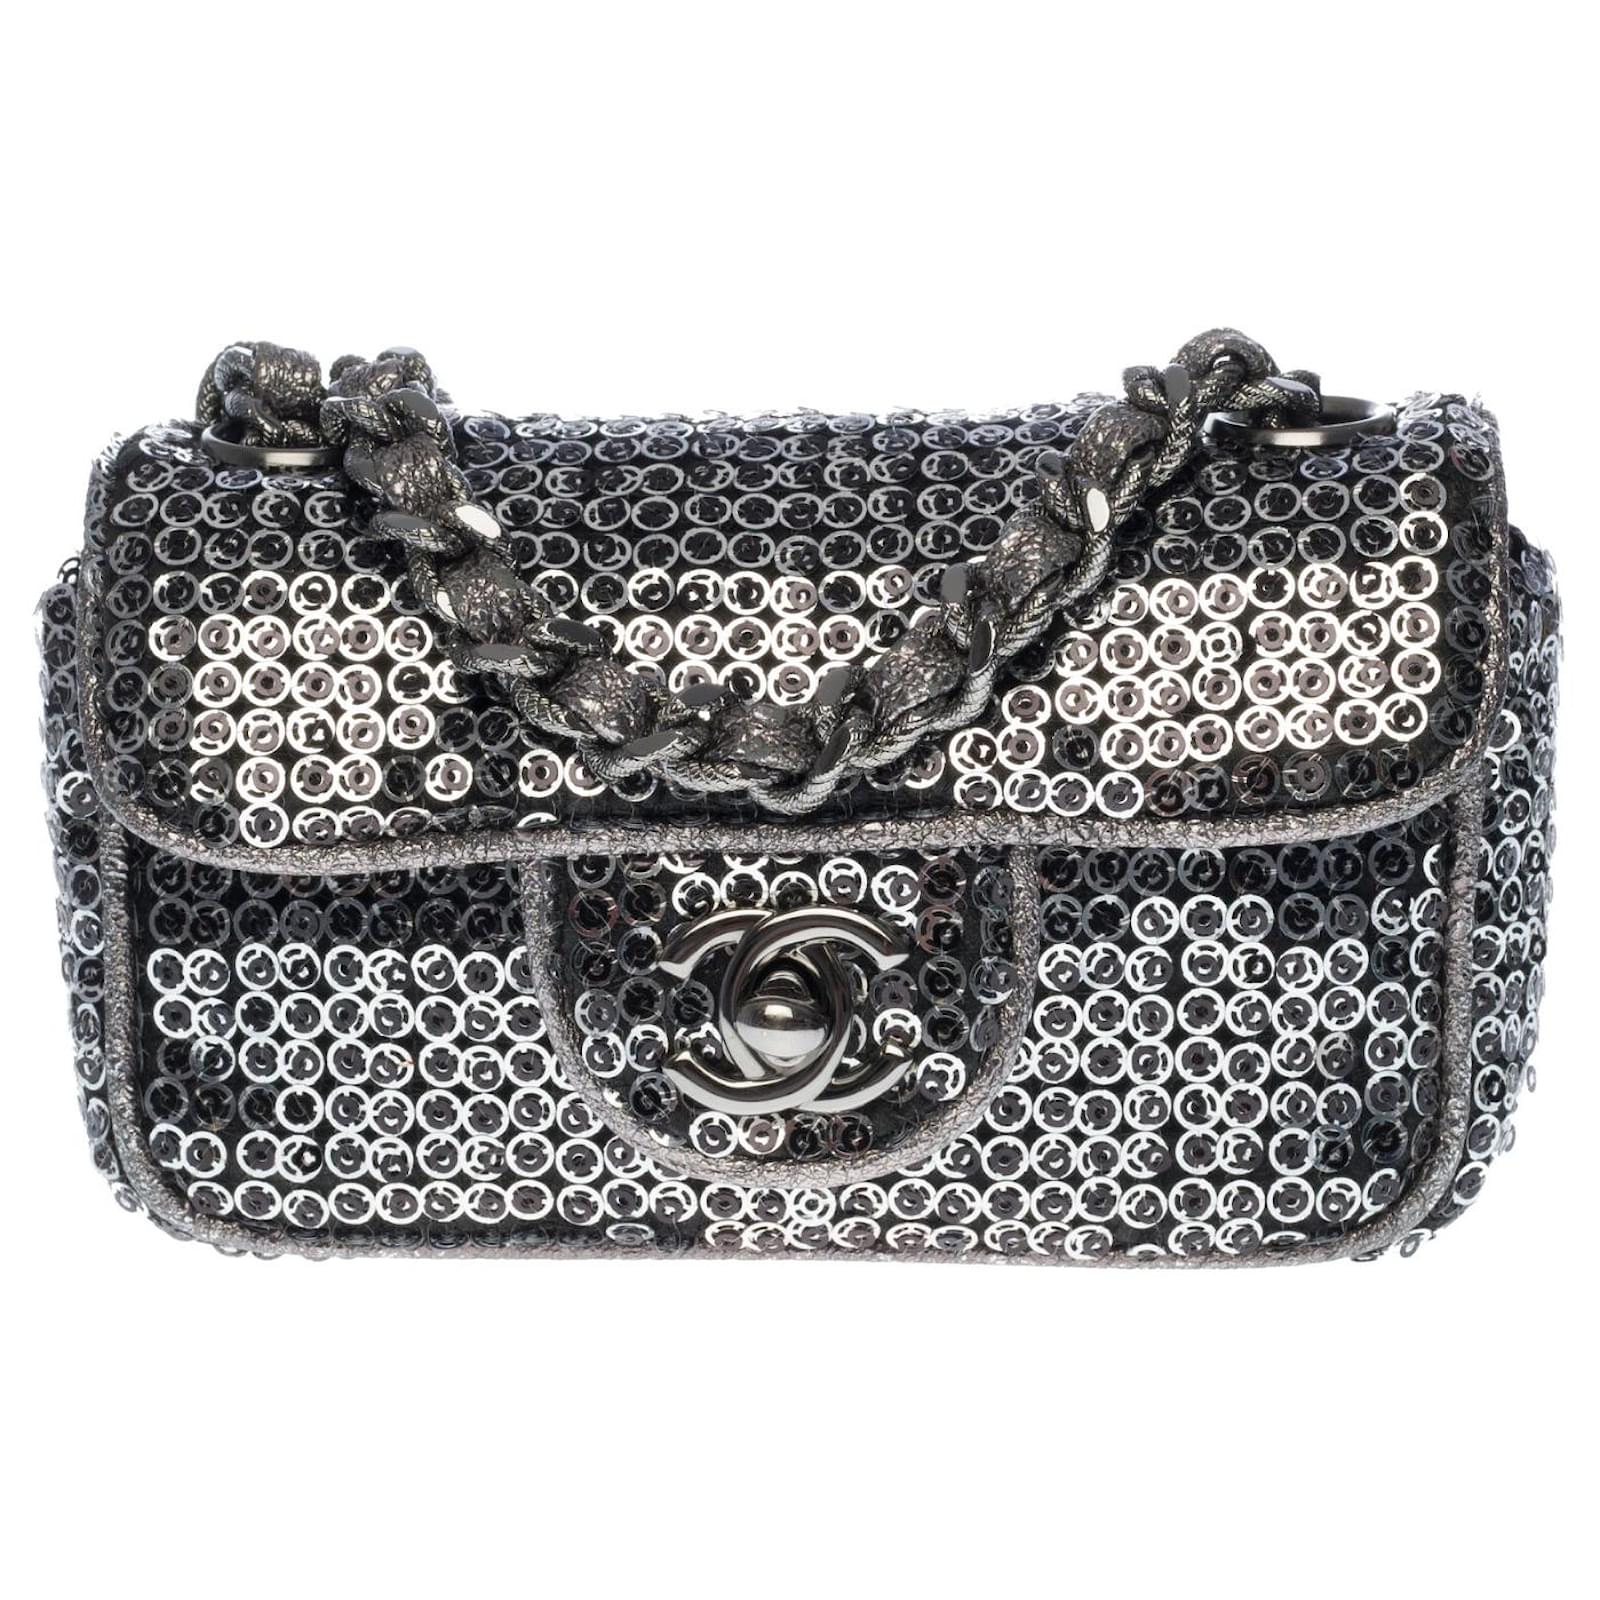 Timeless Chanel mini flap bag limited edition bag in silver